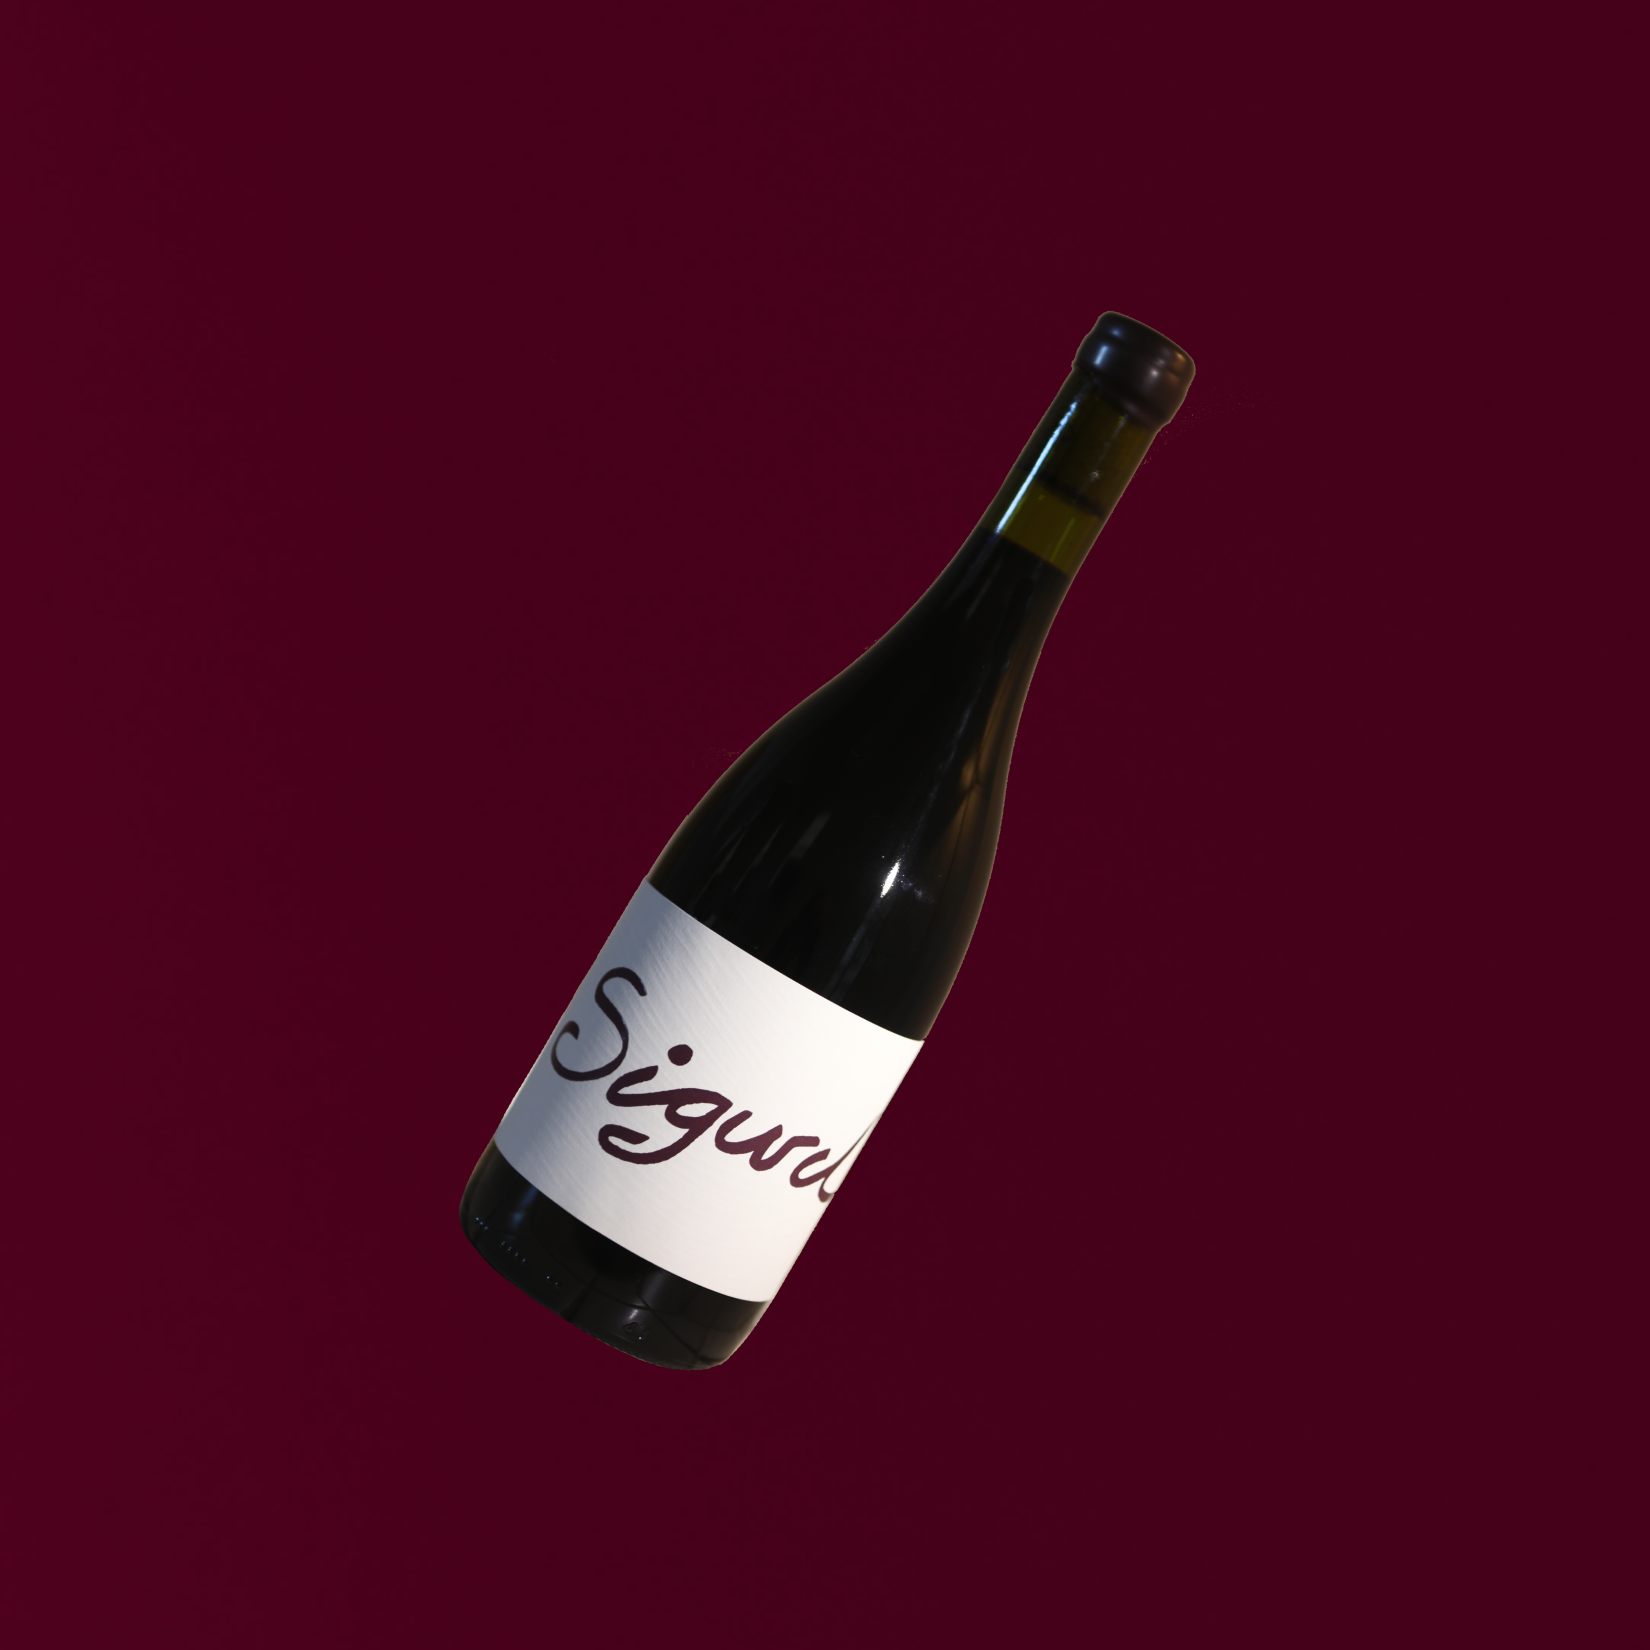 2021 Syrah - SOLD OUT